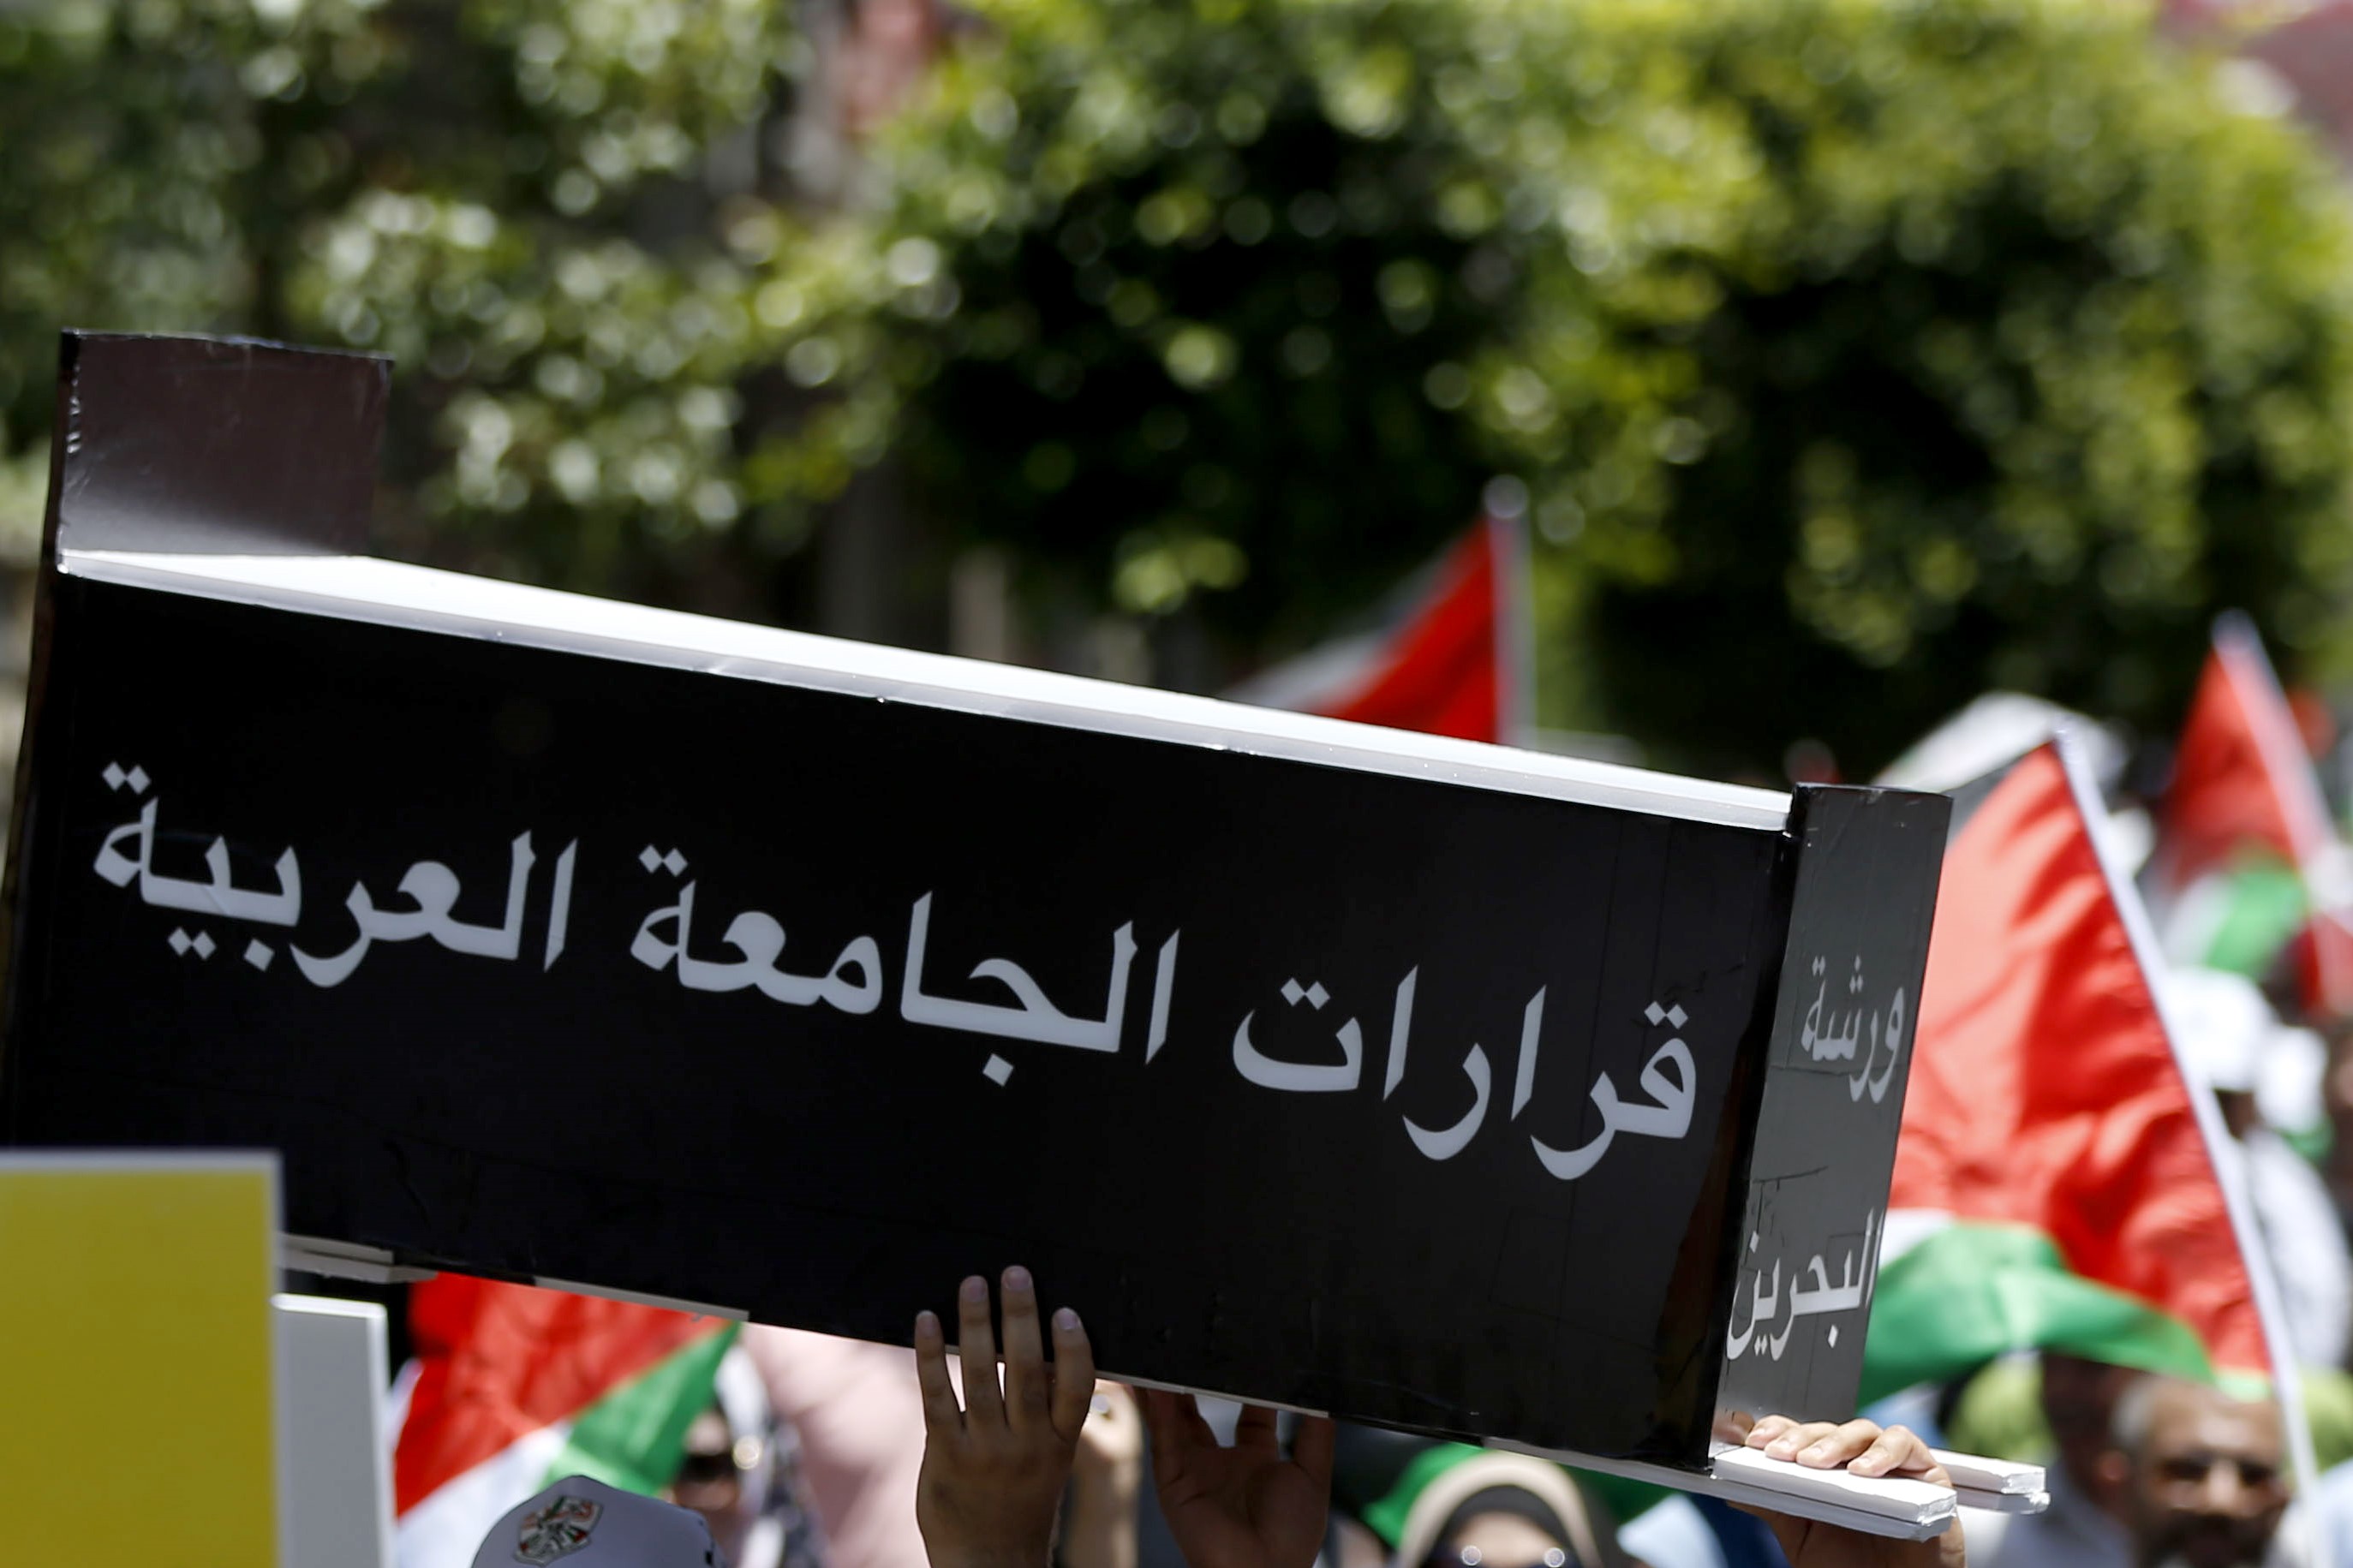 Palestinian demonstrators carry a makeshift coffin with the inscription "the decisions of the Arab League" during a protest against the US-led Peace to Prosperity conference that opens tomorrow in Bahrain, in the Israeli